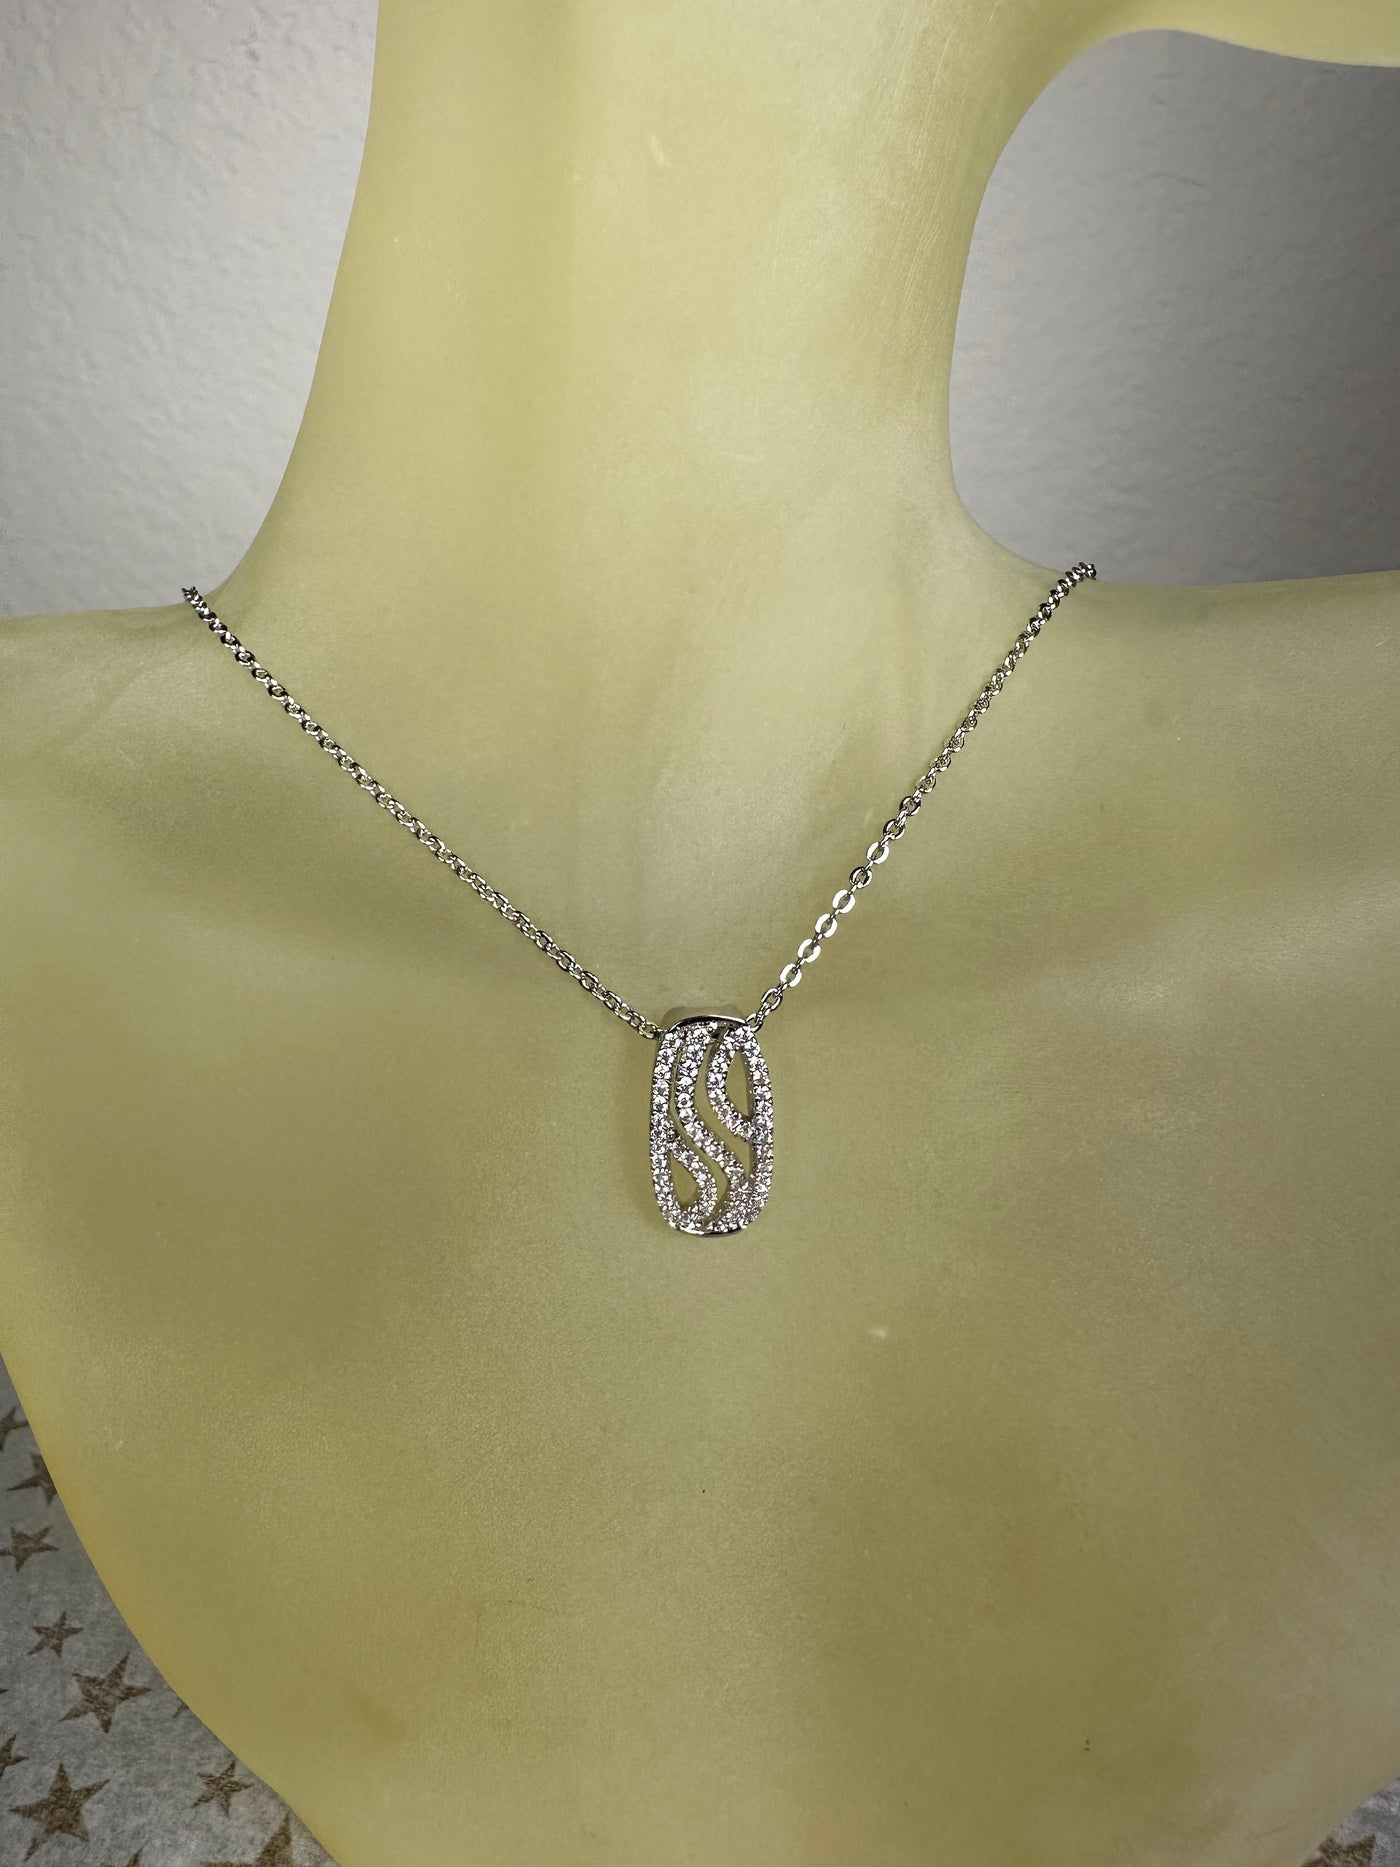 Filigree Style Cut Out Bulging Rectangular Plate Slider Pendant in Silver, Yellow Gold and Rose Gold Tone